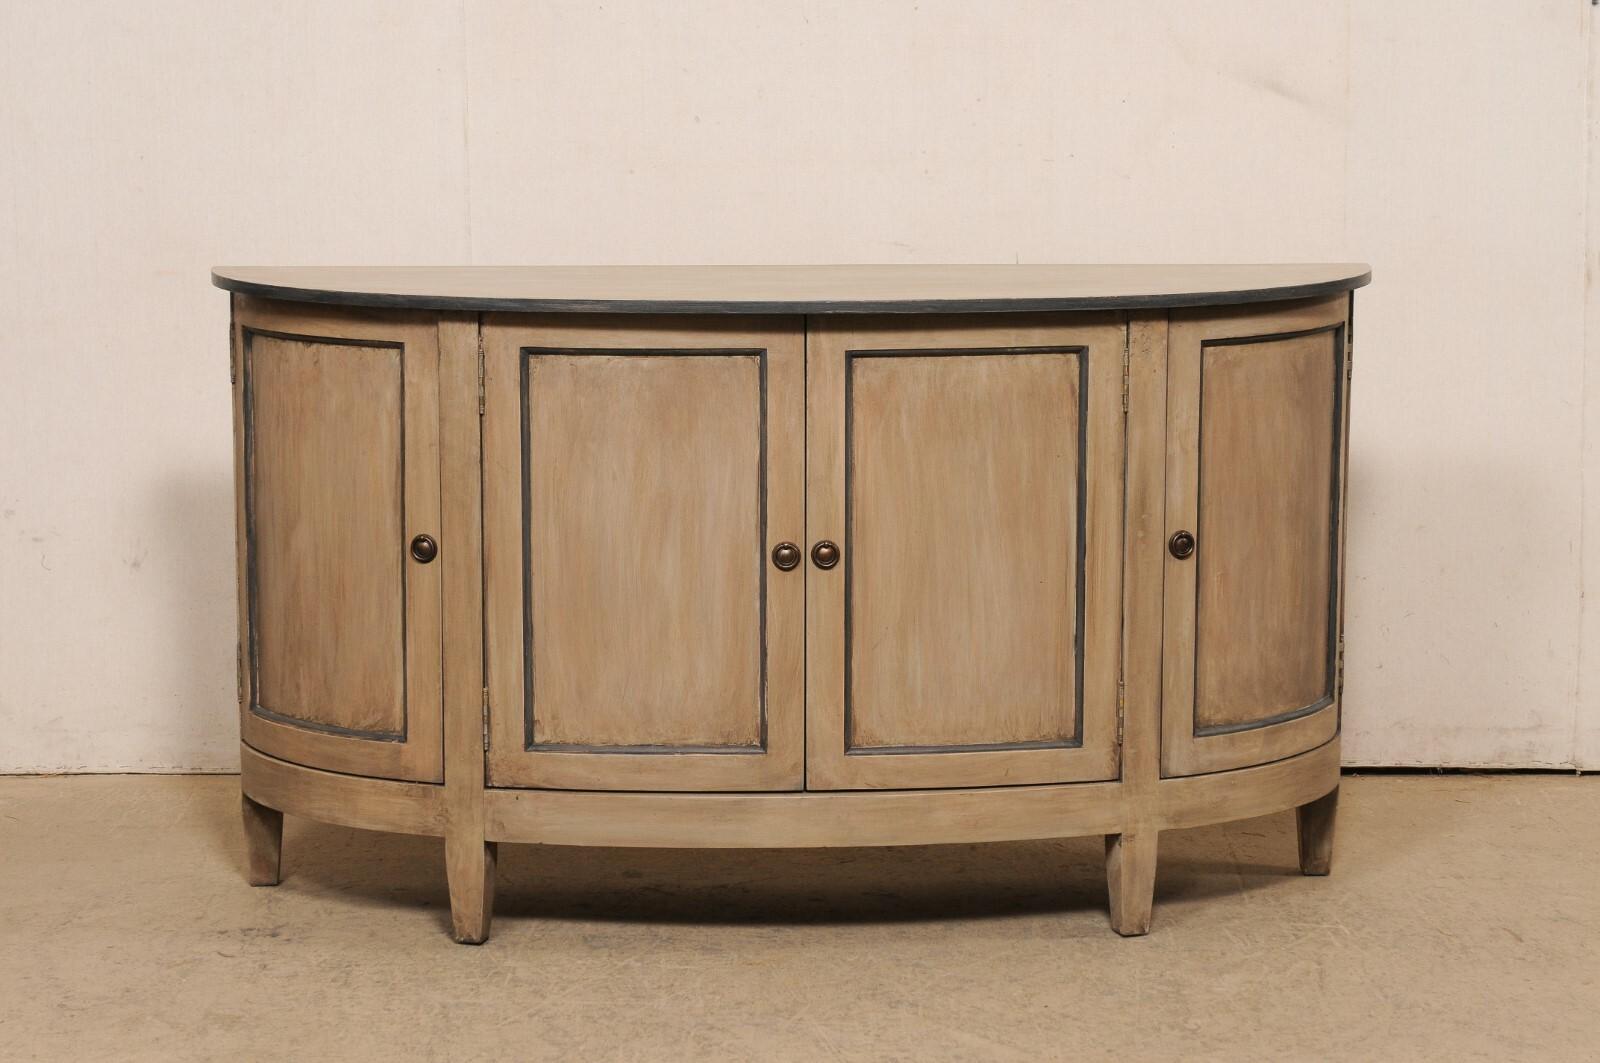 An American painted wood demi-lune console cabinet, minimally adorn in clean lines. This vintage American made cabinet has an oblong demi shape, with flattened backside as to rest snuggly against a wall. The top overhangs the case below which houses